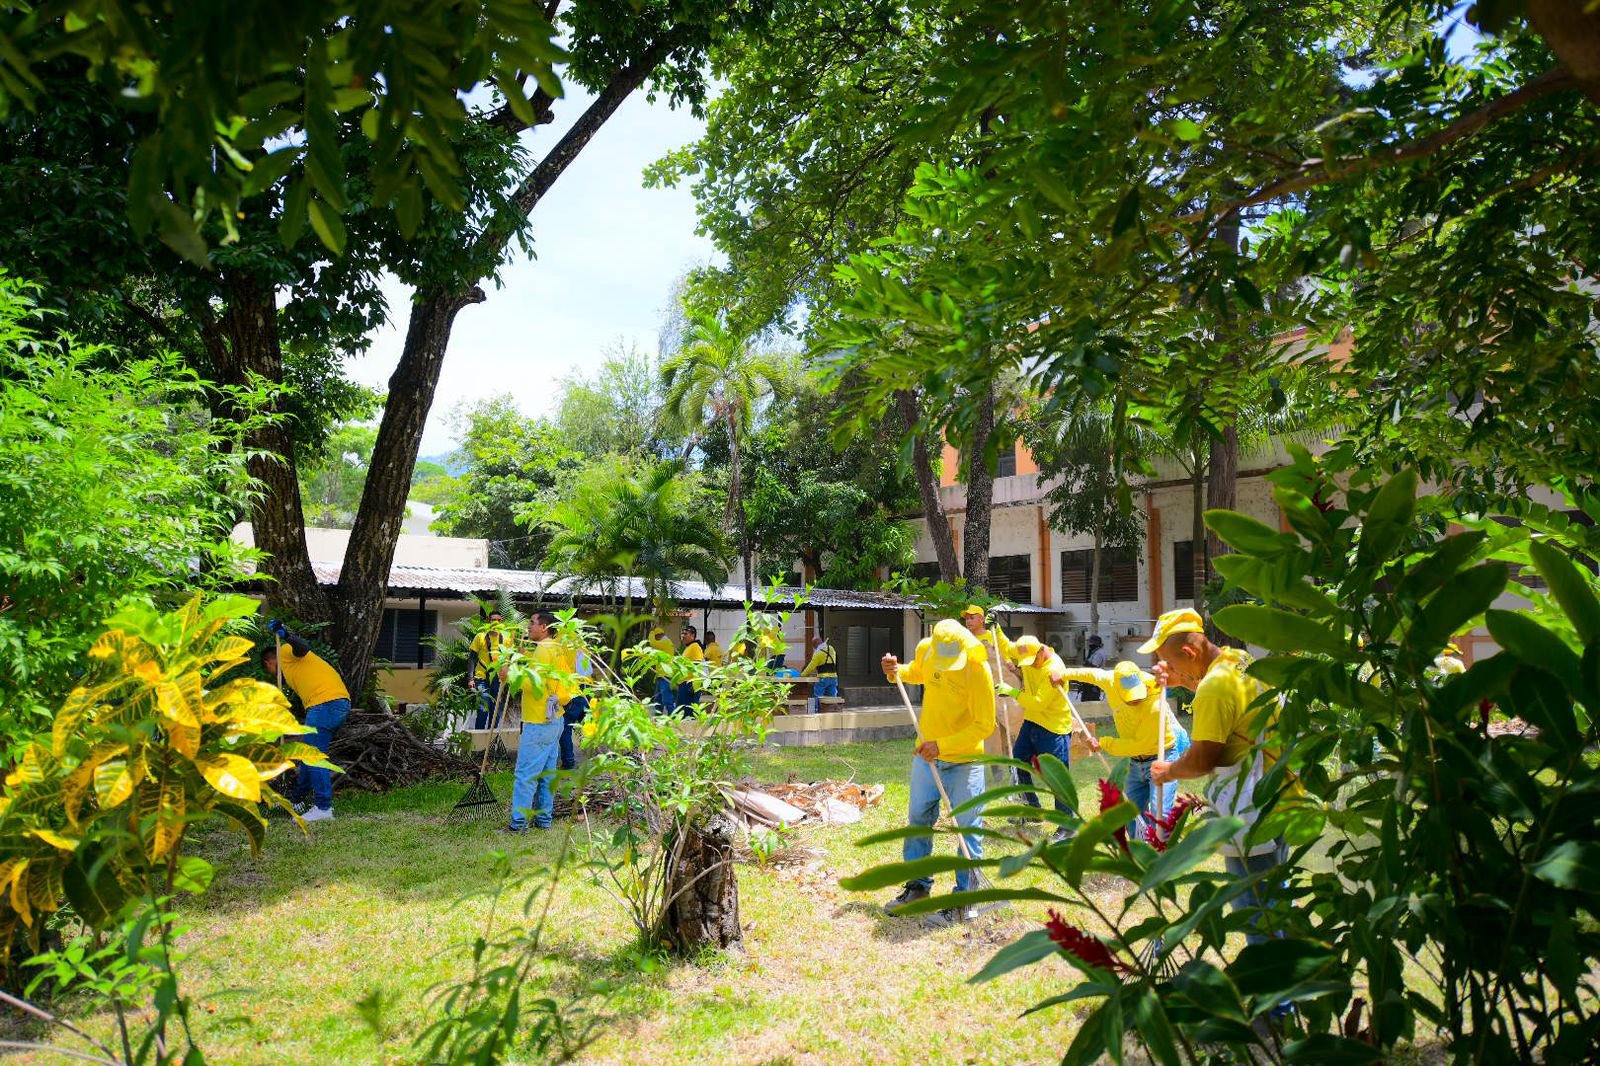 Cleaning work continues at the University of El Salvador Time News